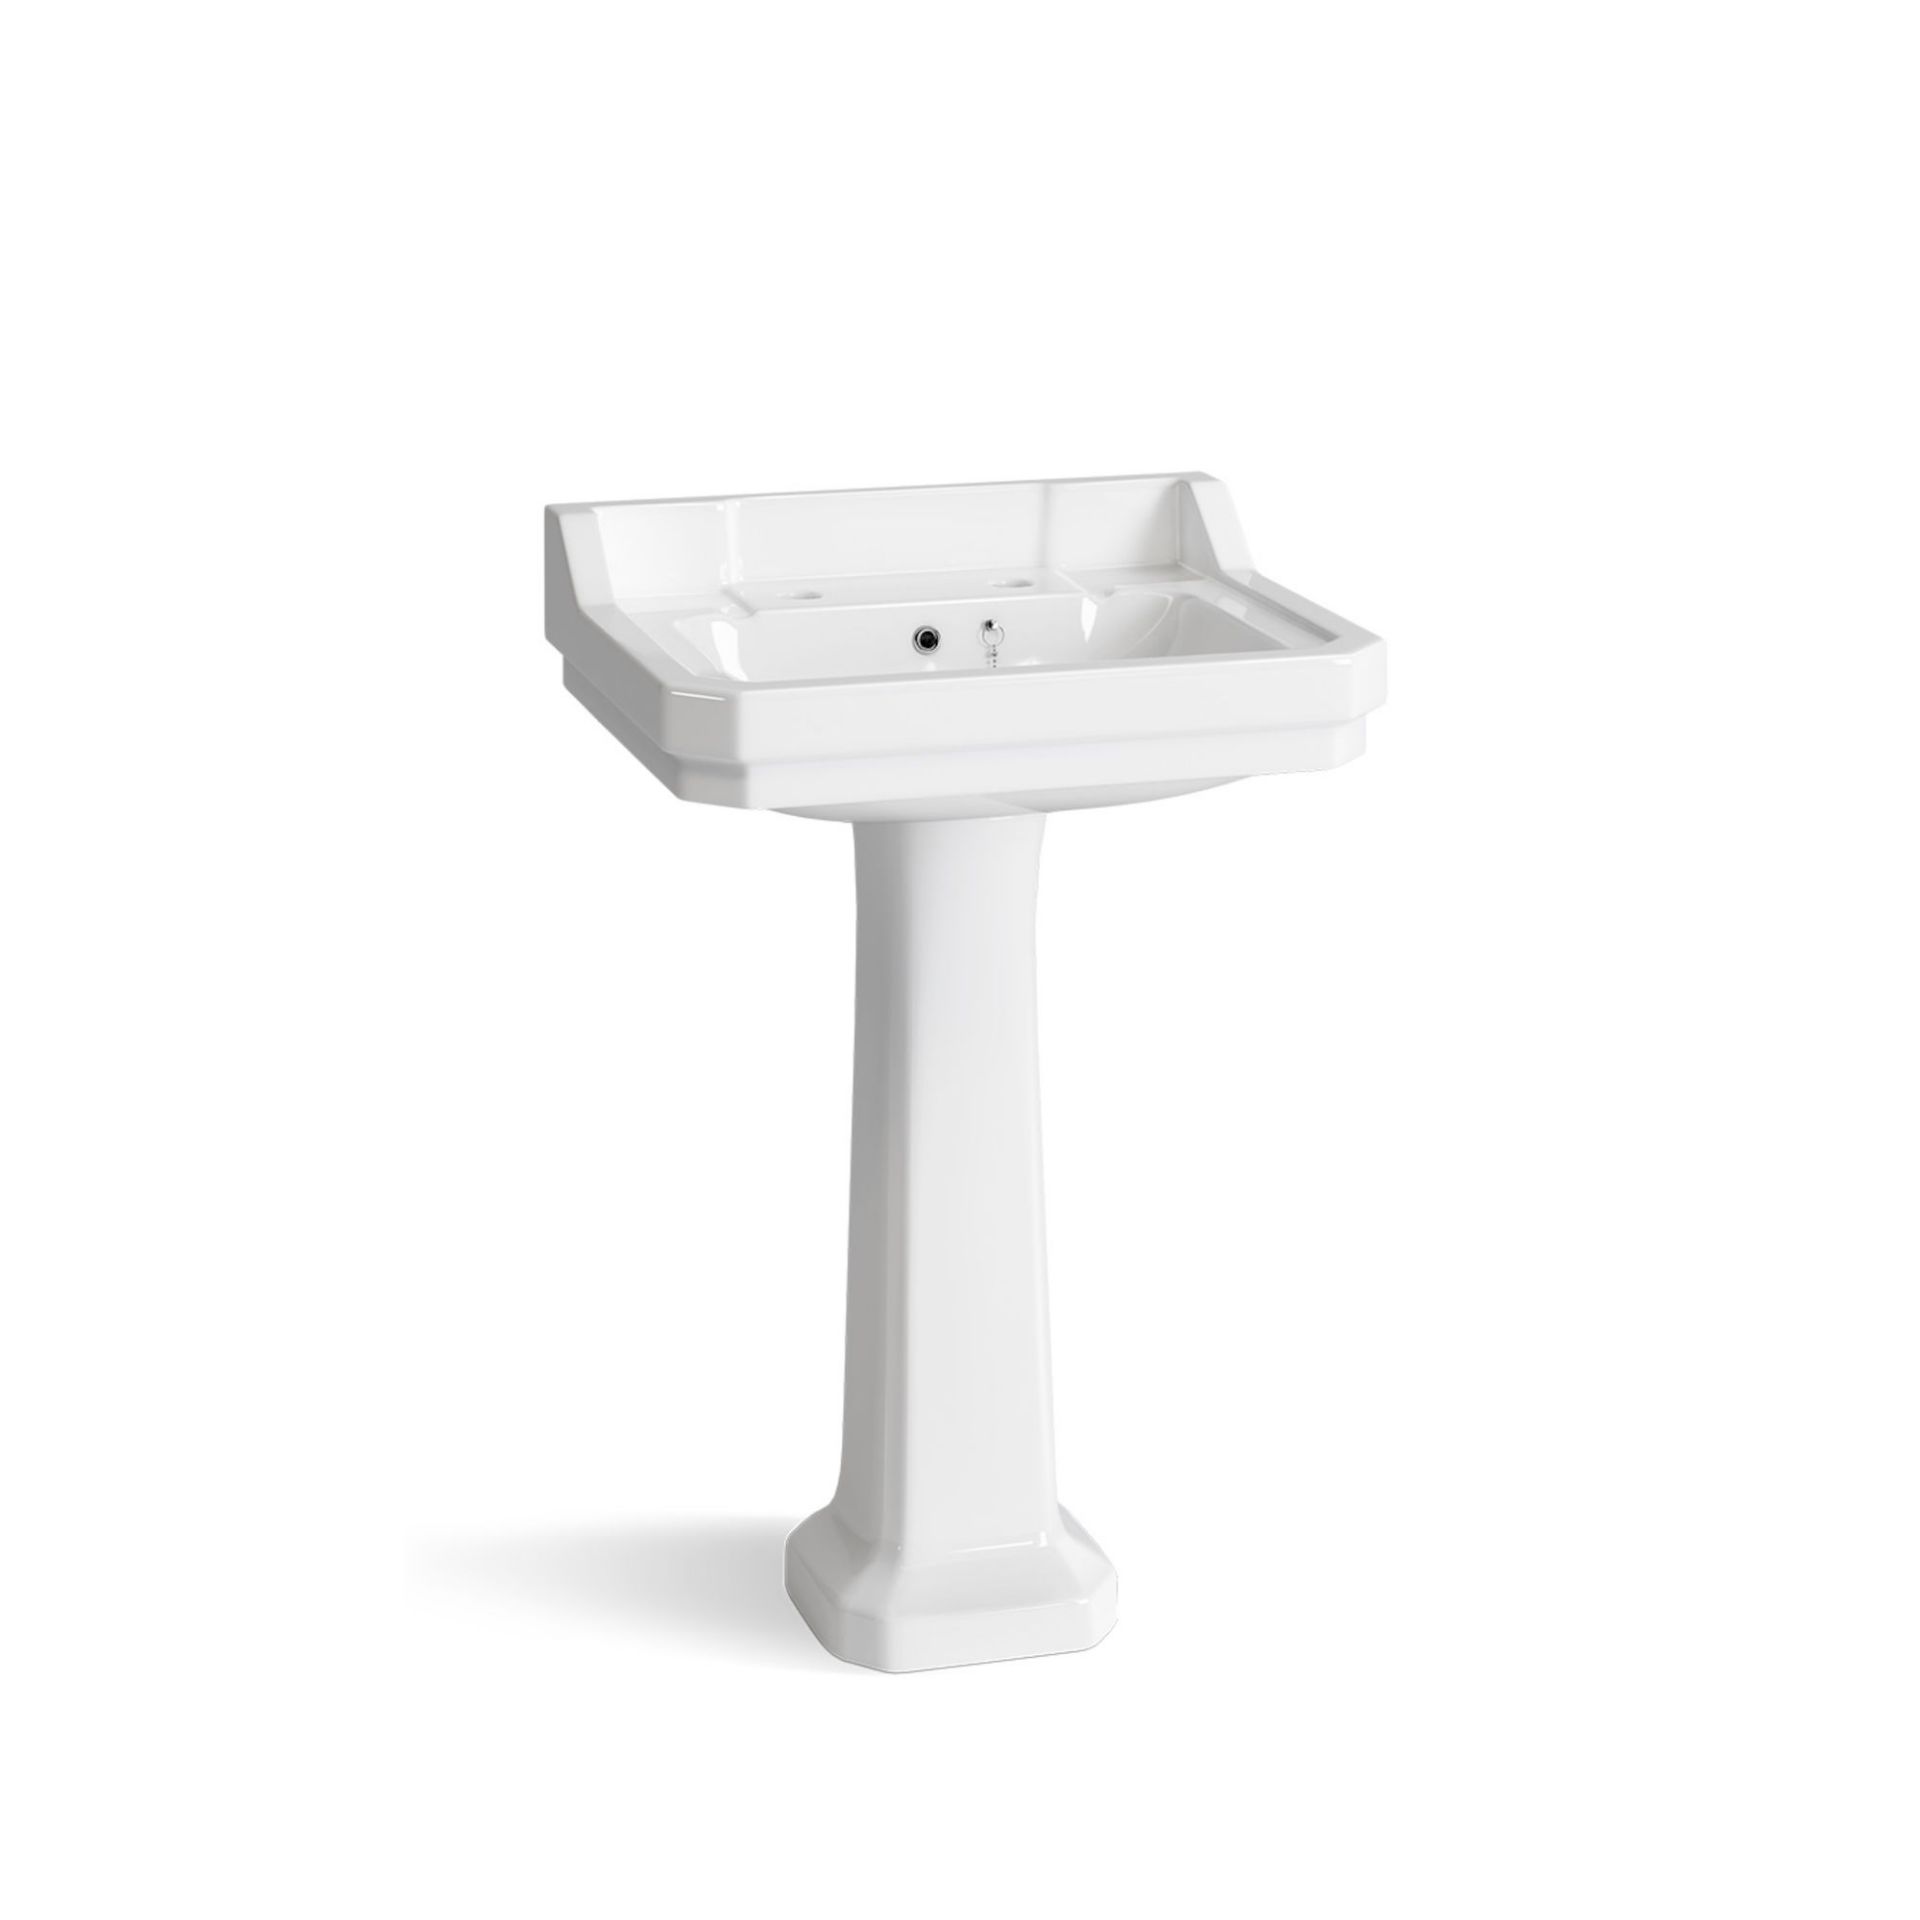 New Cambridge Traditional Basin - Double Tap Hole. RRP £224.99. (Cag629Fb2V2). Traditional Fe - Image 3 of 3